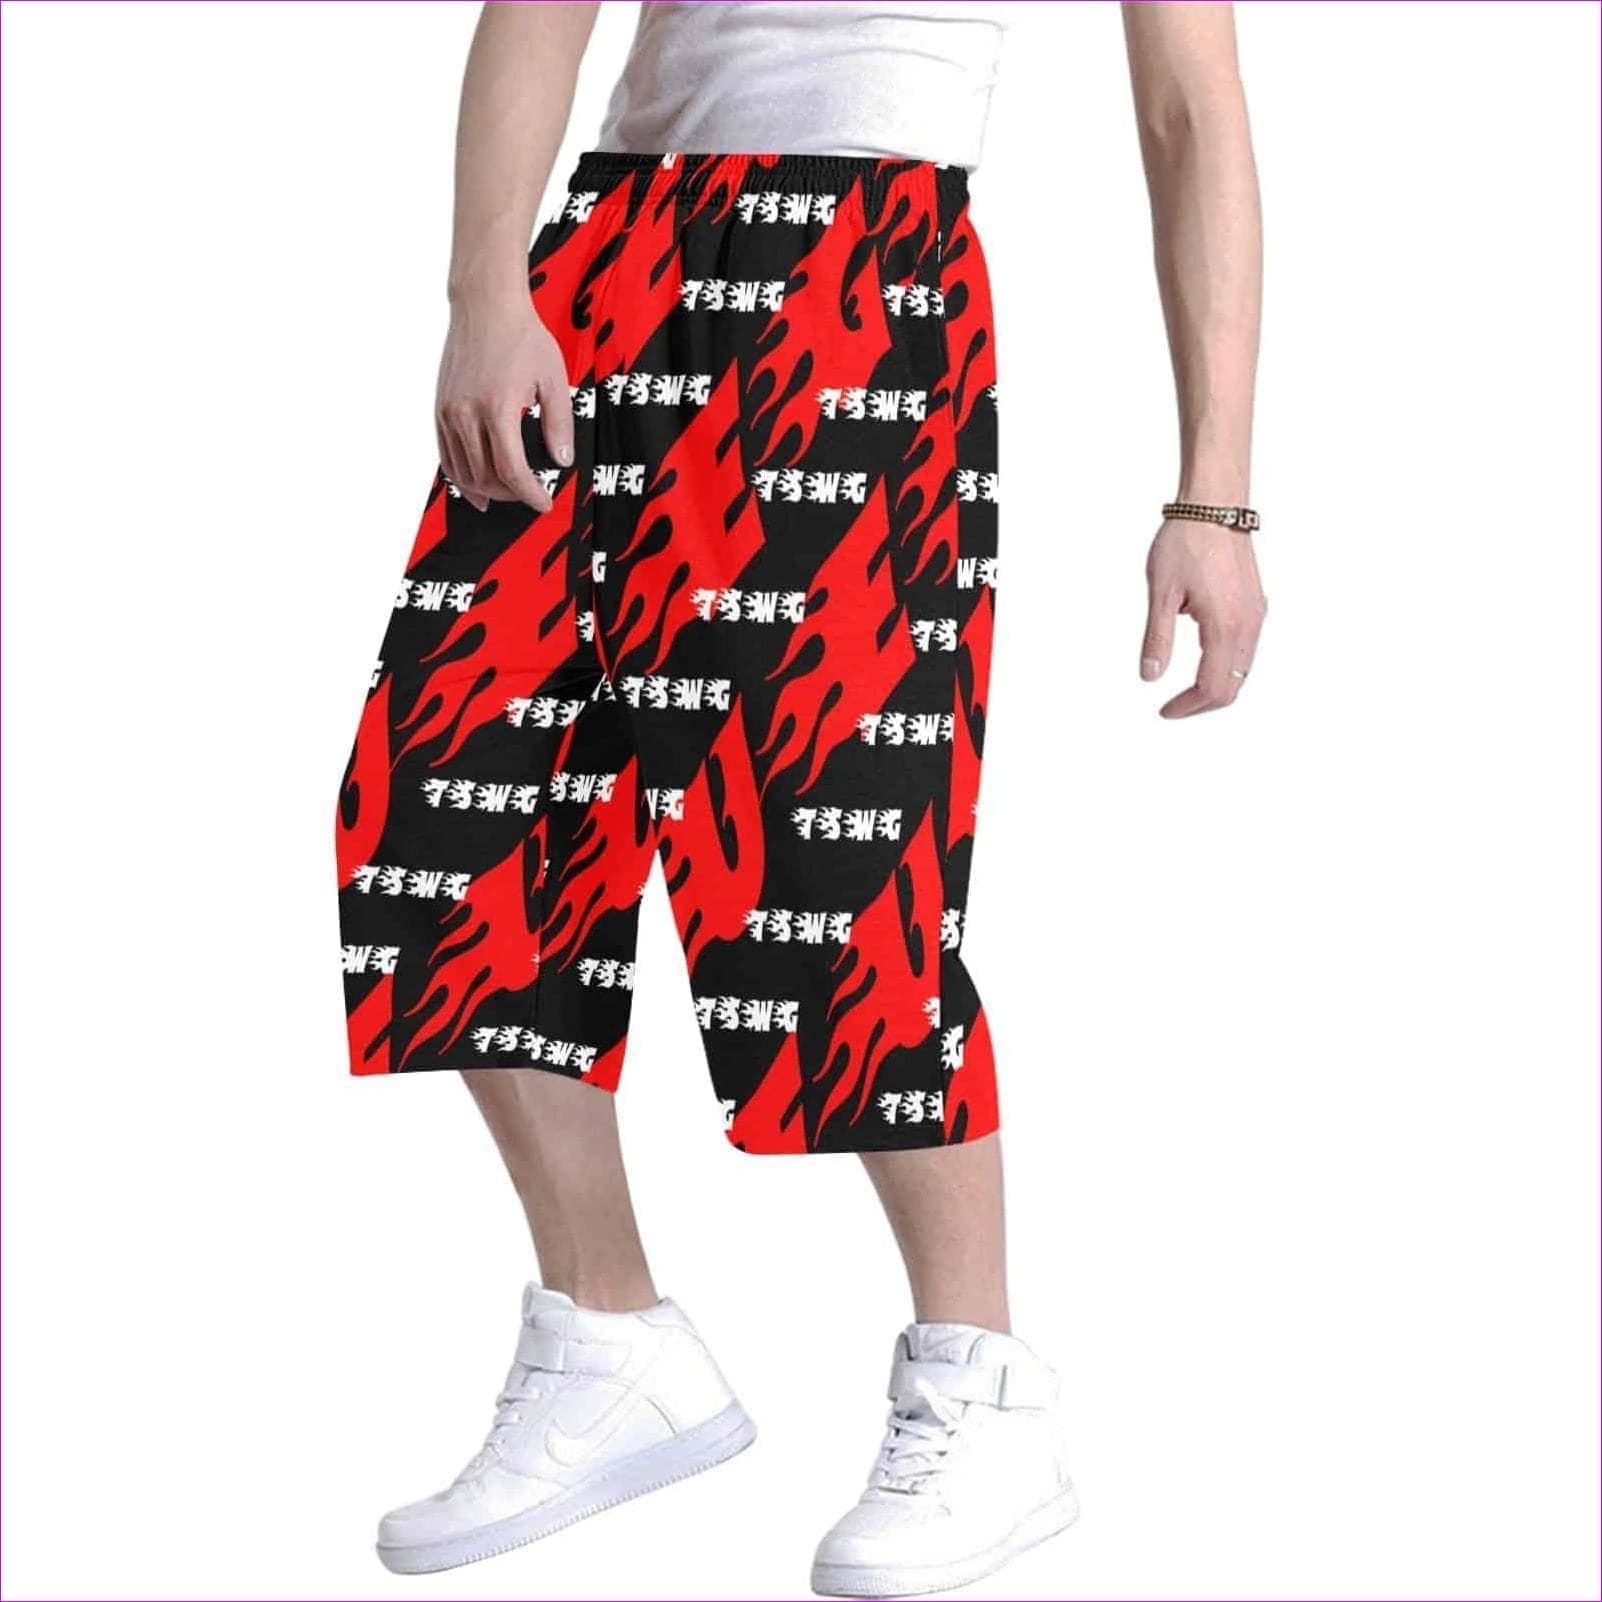 TSWG Fuego Flame 2 Men's All Over Print Baggy Shorts (Model L37) - TSWG Fuego Flame Baggy Shorts for Men - Red - 2 styles - mens shorts at TFC&H Co.